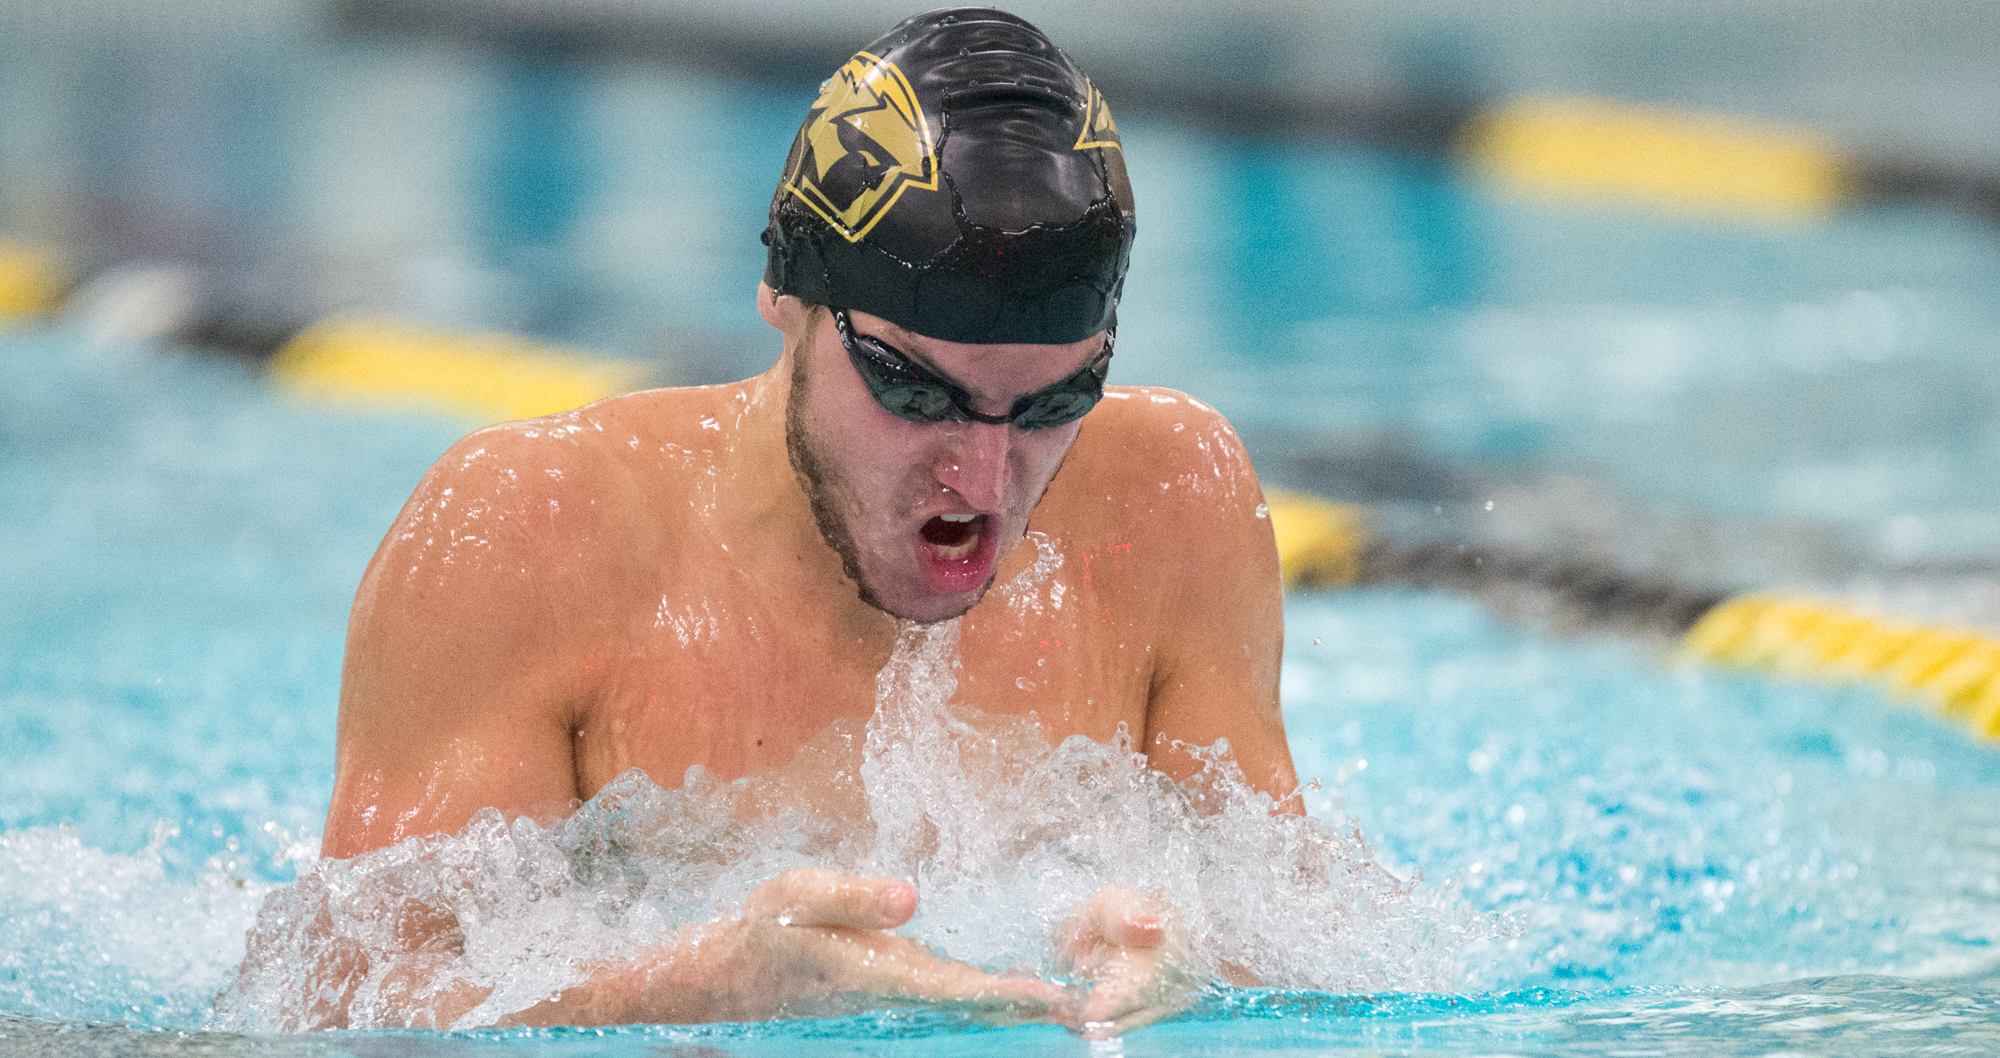 Jacob Casper finished second in the 100-yard breaststroke with a time of 1:04.81.